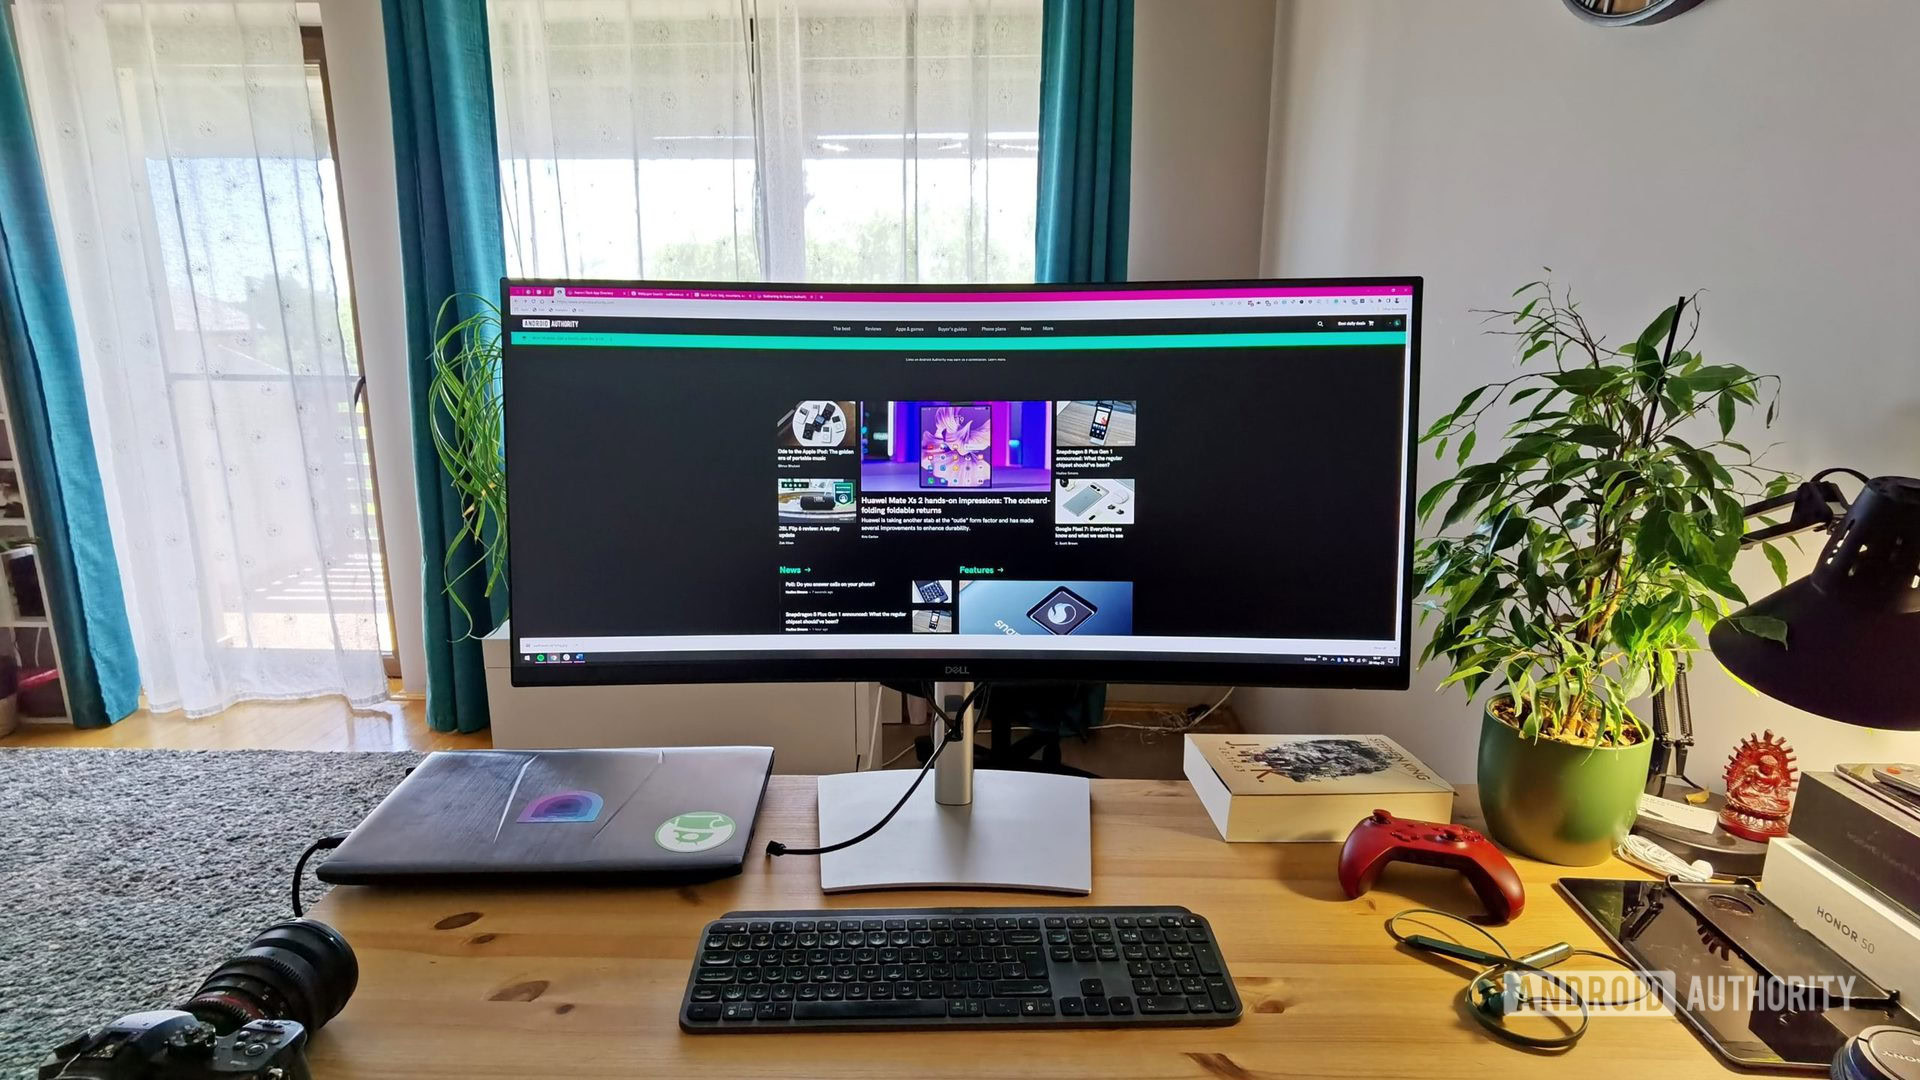 Dell P3421W ultrawide monitor on a desk with laptop, keyboard, lamp, and other accessories.